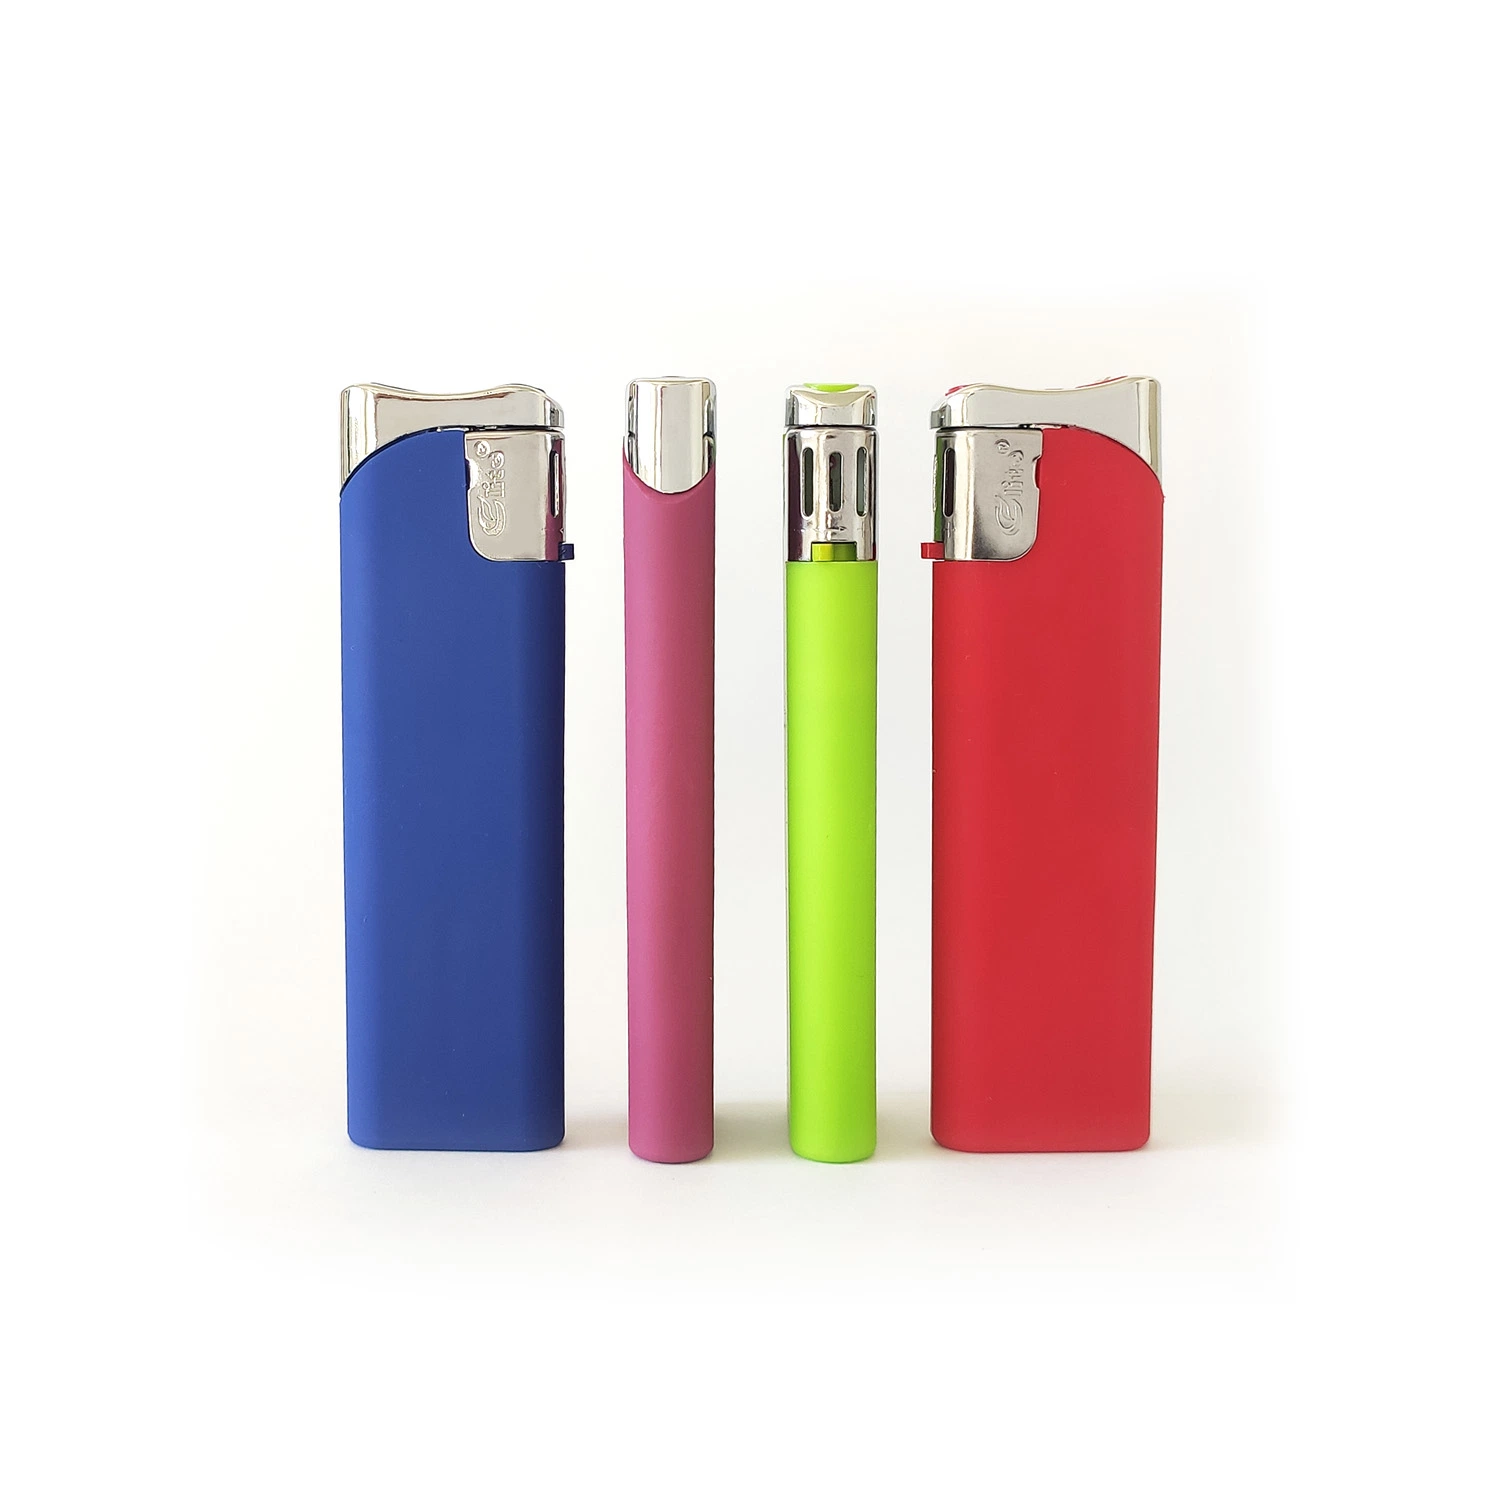 Refillable Electronic Gas Lighter Fh-805 Transparent Plastic ISO9994 Lighter